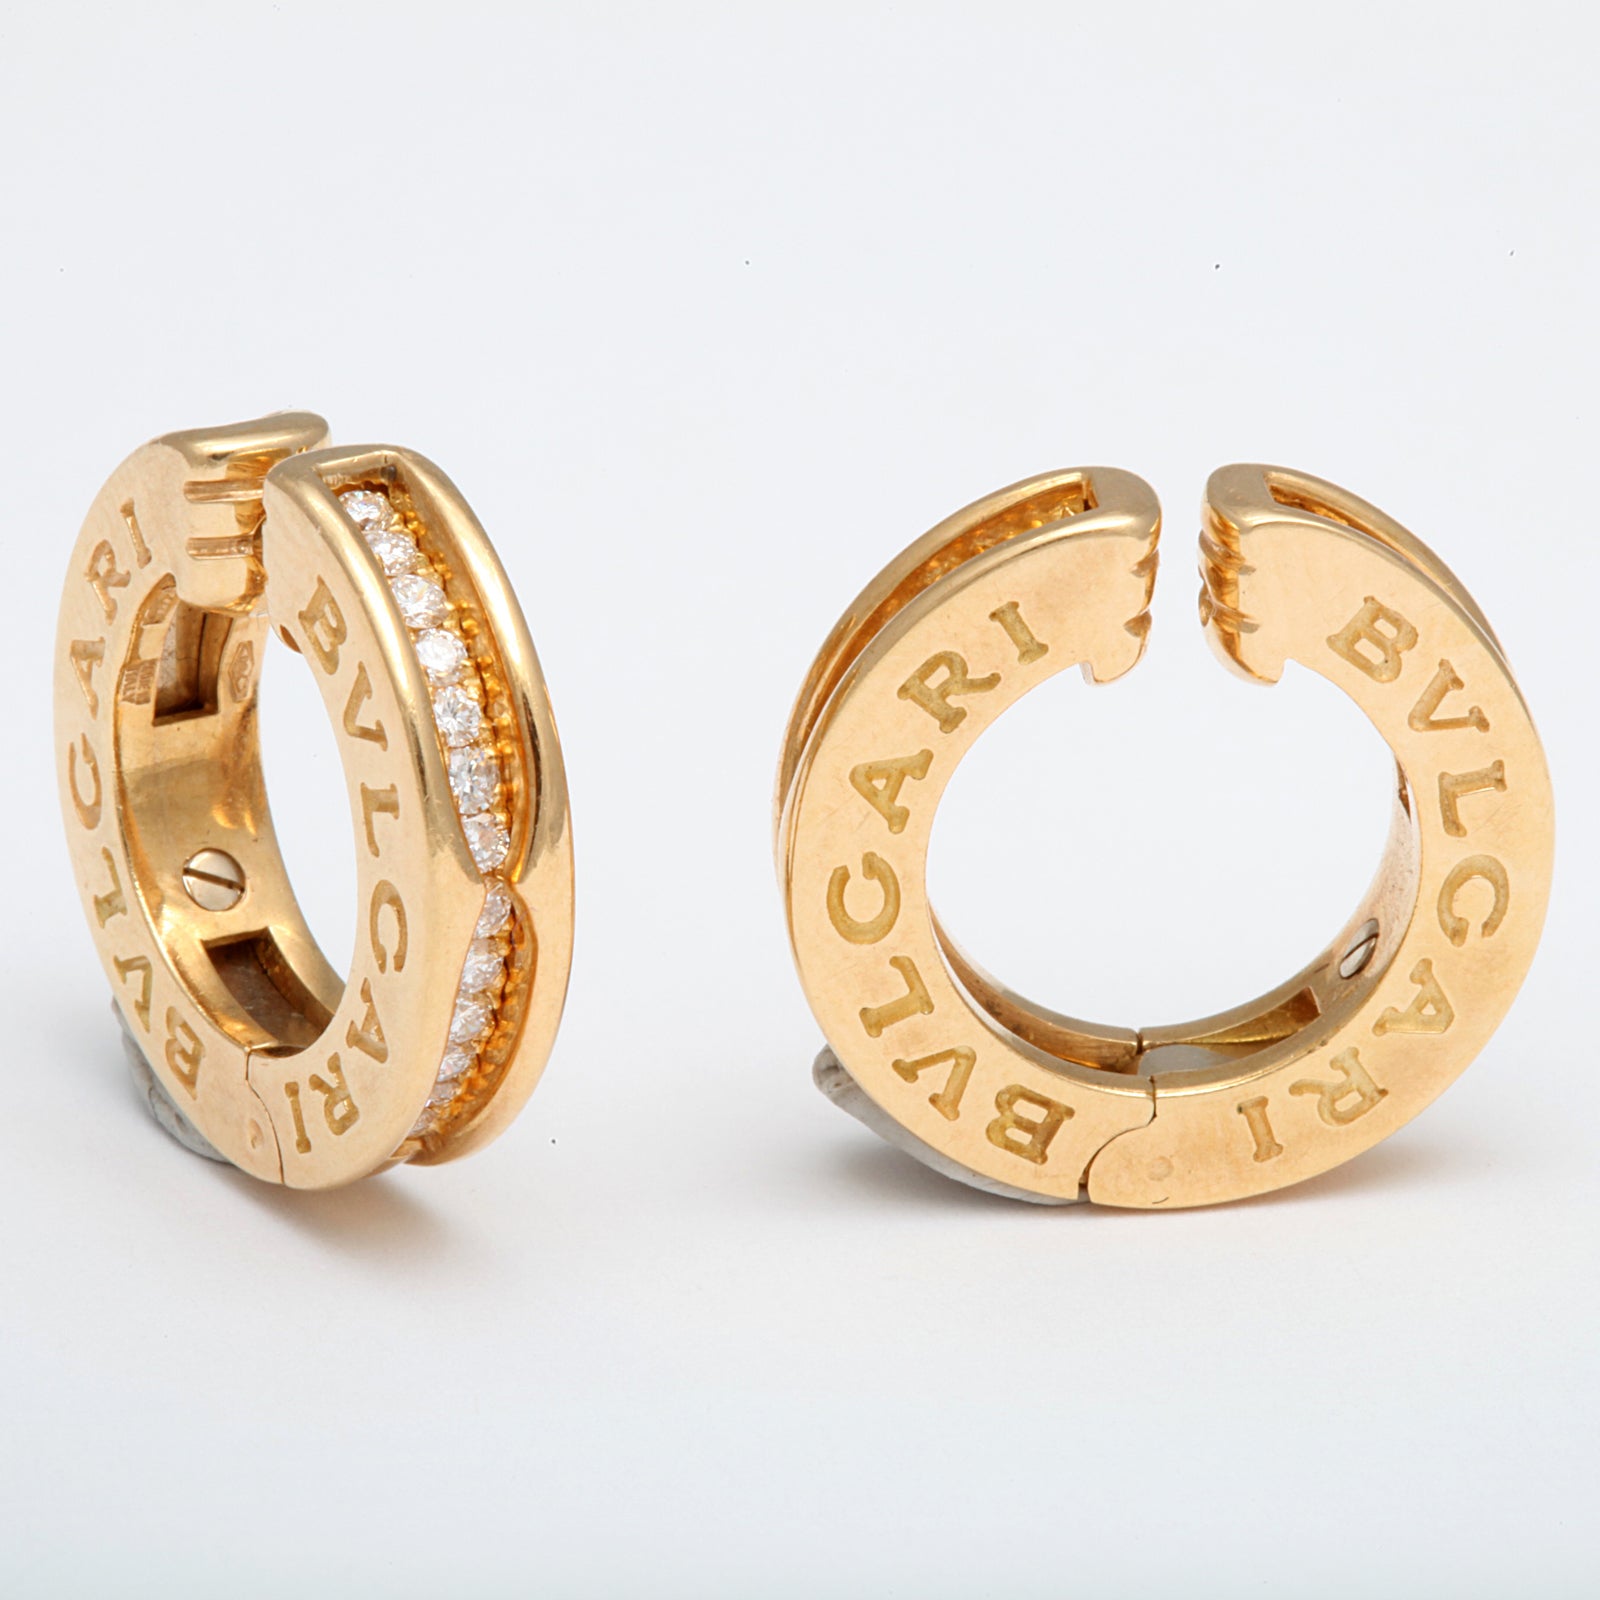 BVLGARI B. Zero diamond hoop earrings featuring 0.50 cts, in 18k yellow gold.  Fully Stamped!

Retail $6,100